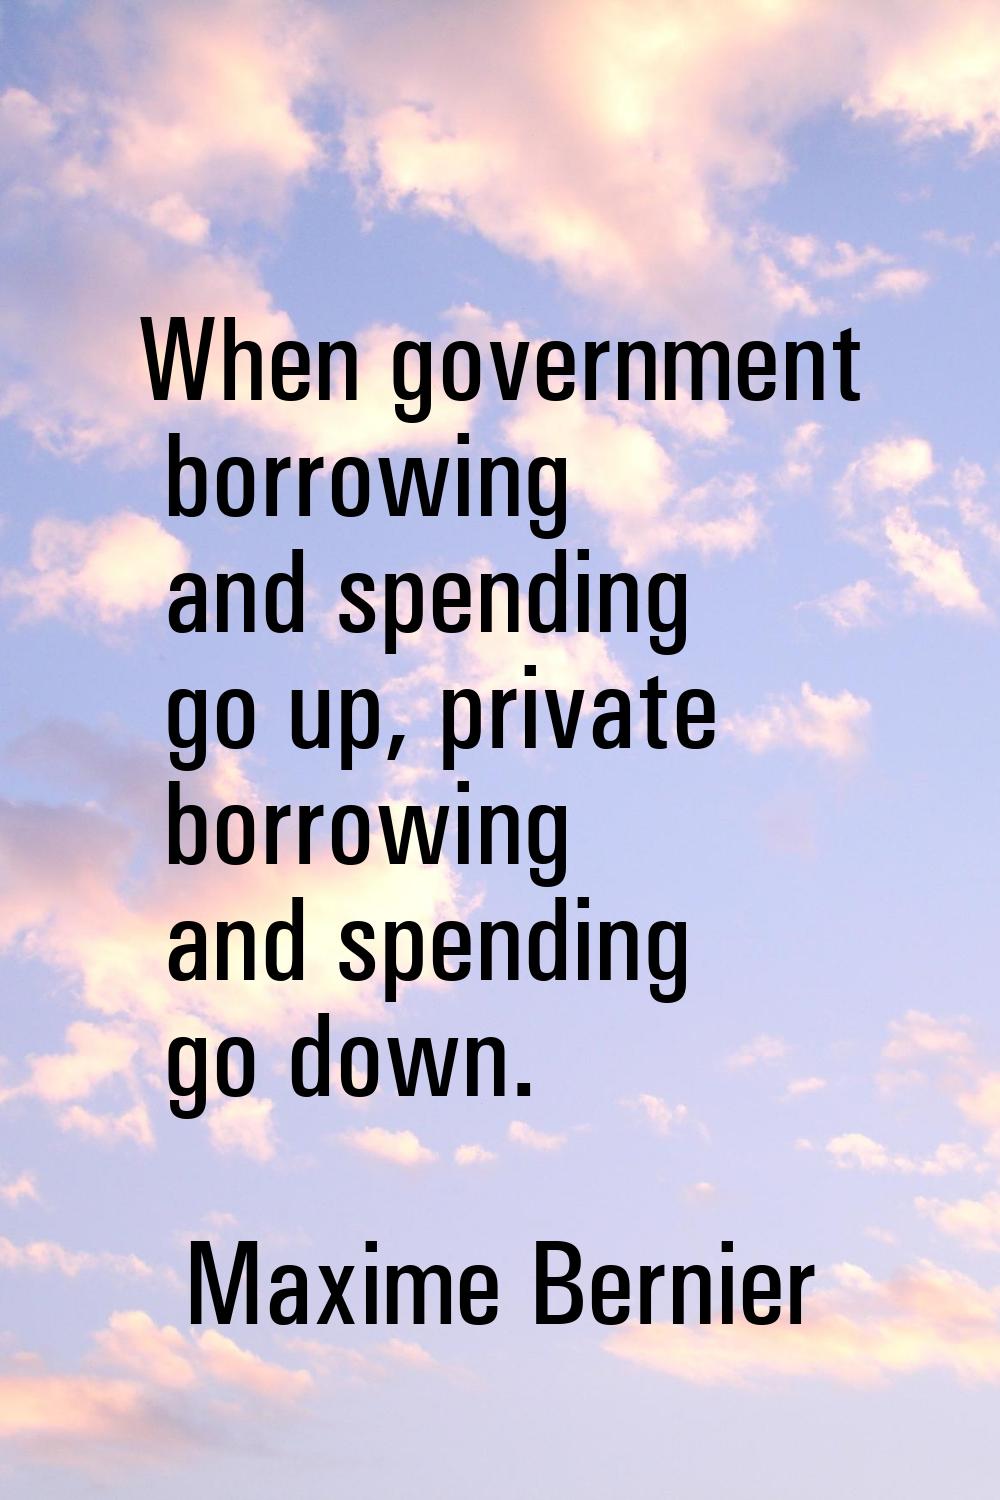 When government borrowing and spending go up, private borrowing and spending go down.